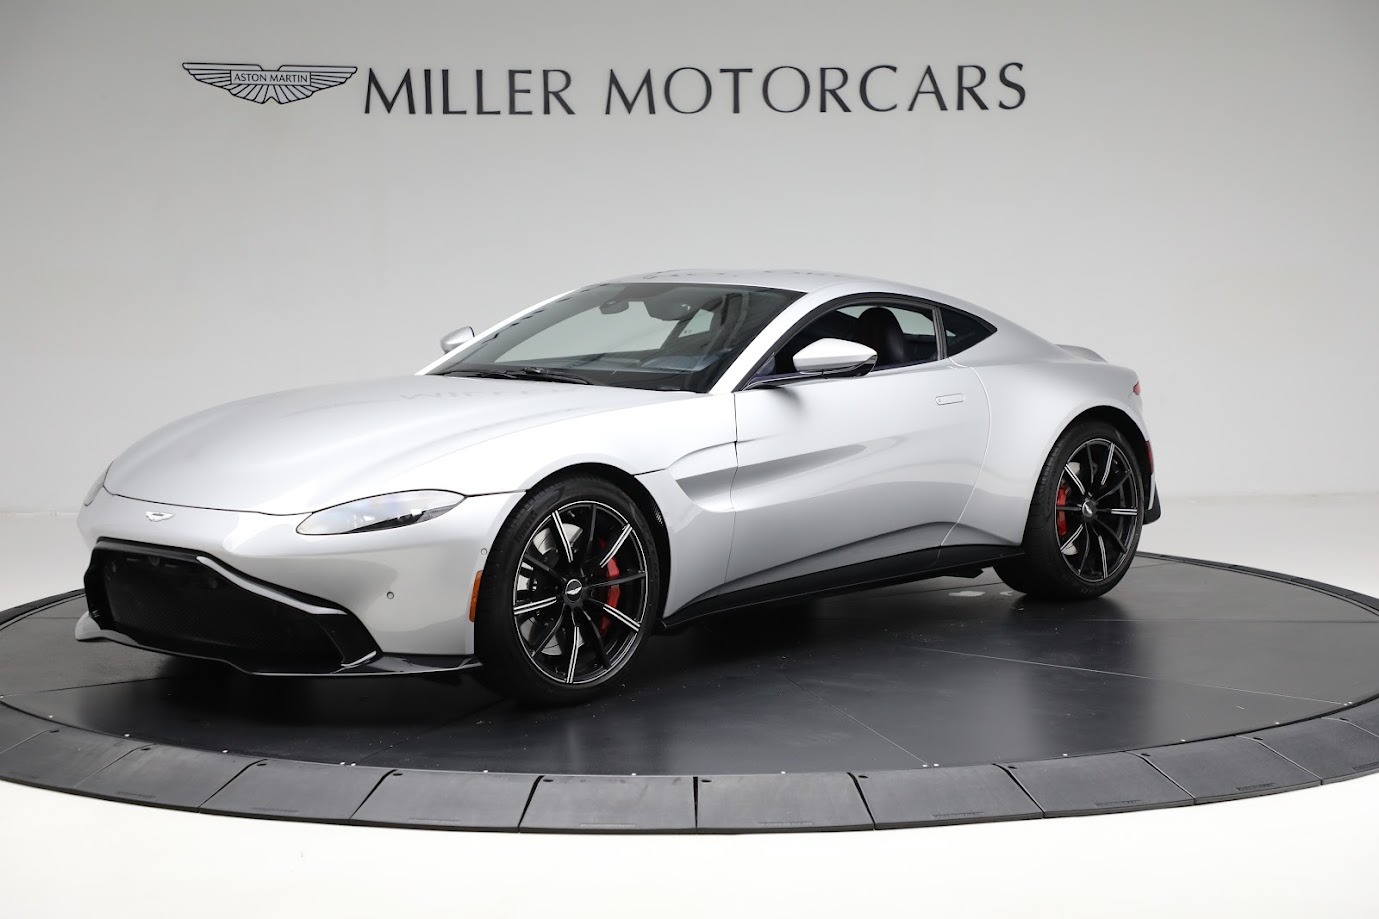 Used 2020 Aston Martin Vantage Coupe for sale Sold at Pagani of Greenwich in Greenwich CT 06830 1